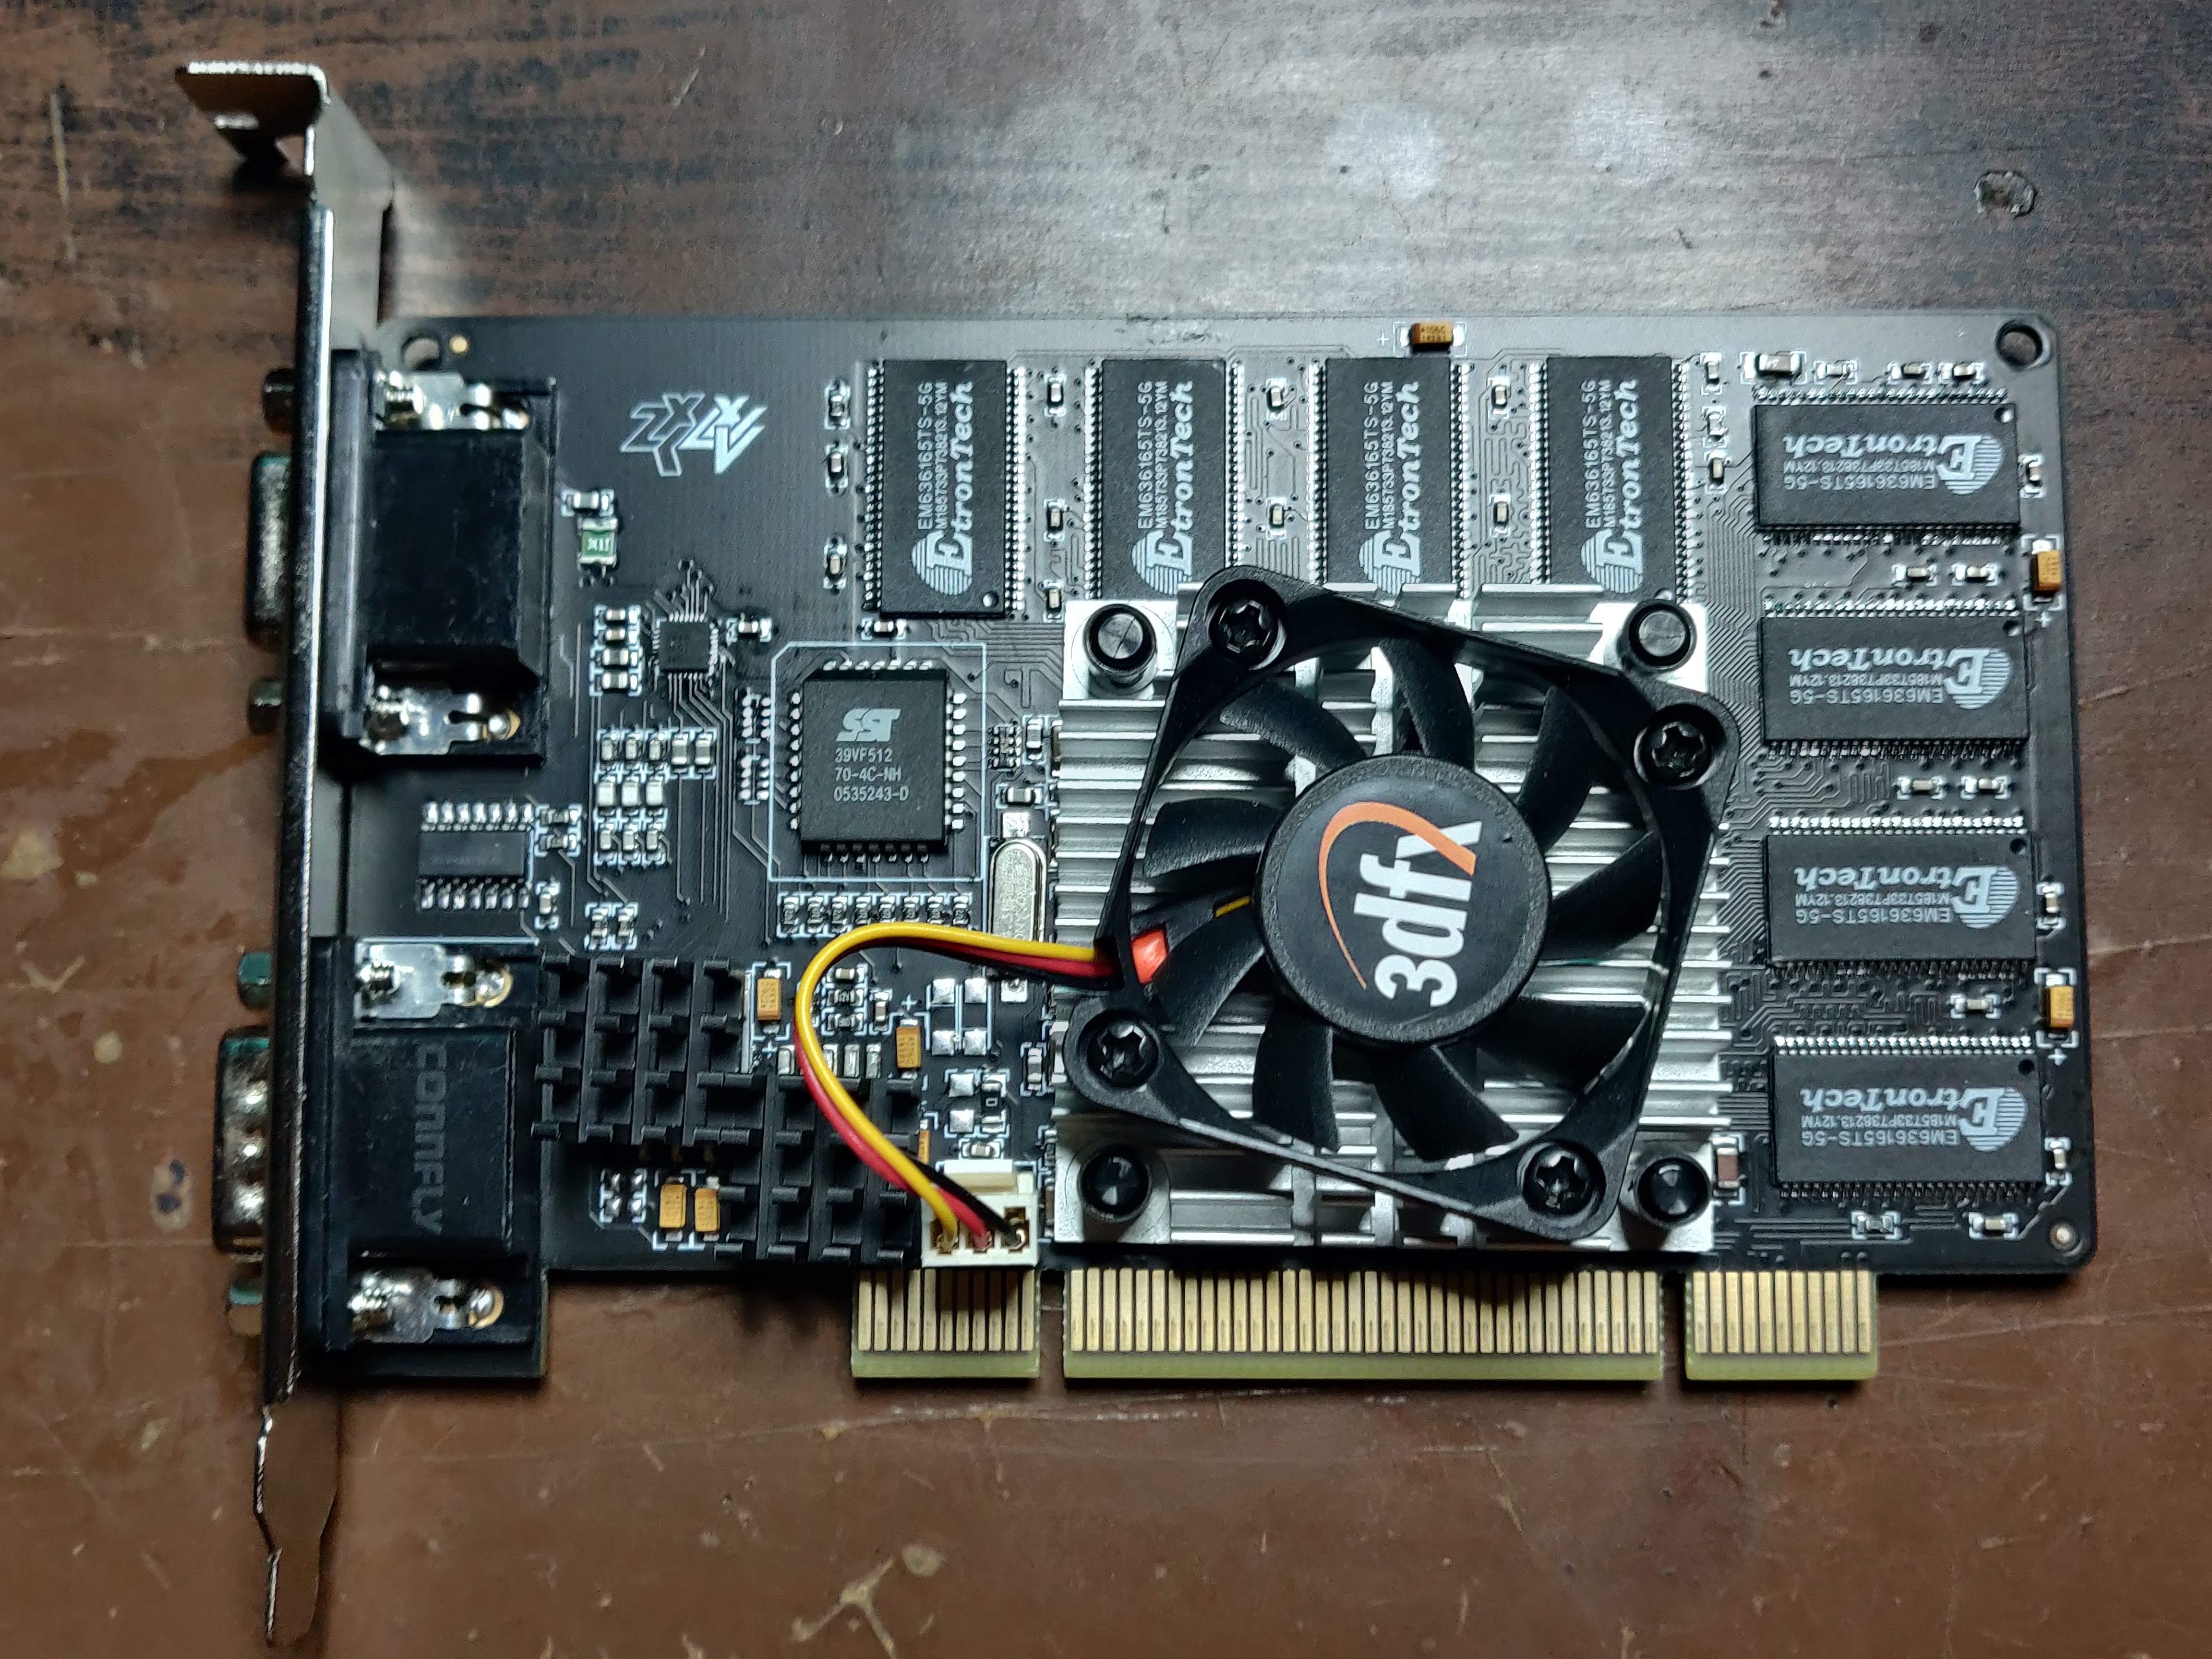 3DFX spirit lives on: Reproduction Voodoo 3 3500 PCI by Anthony Zxclxiv